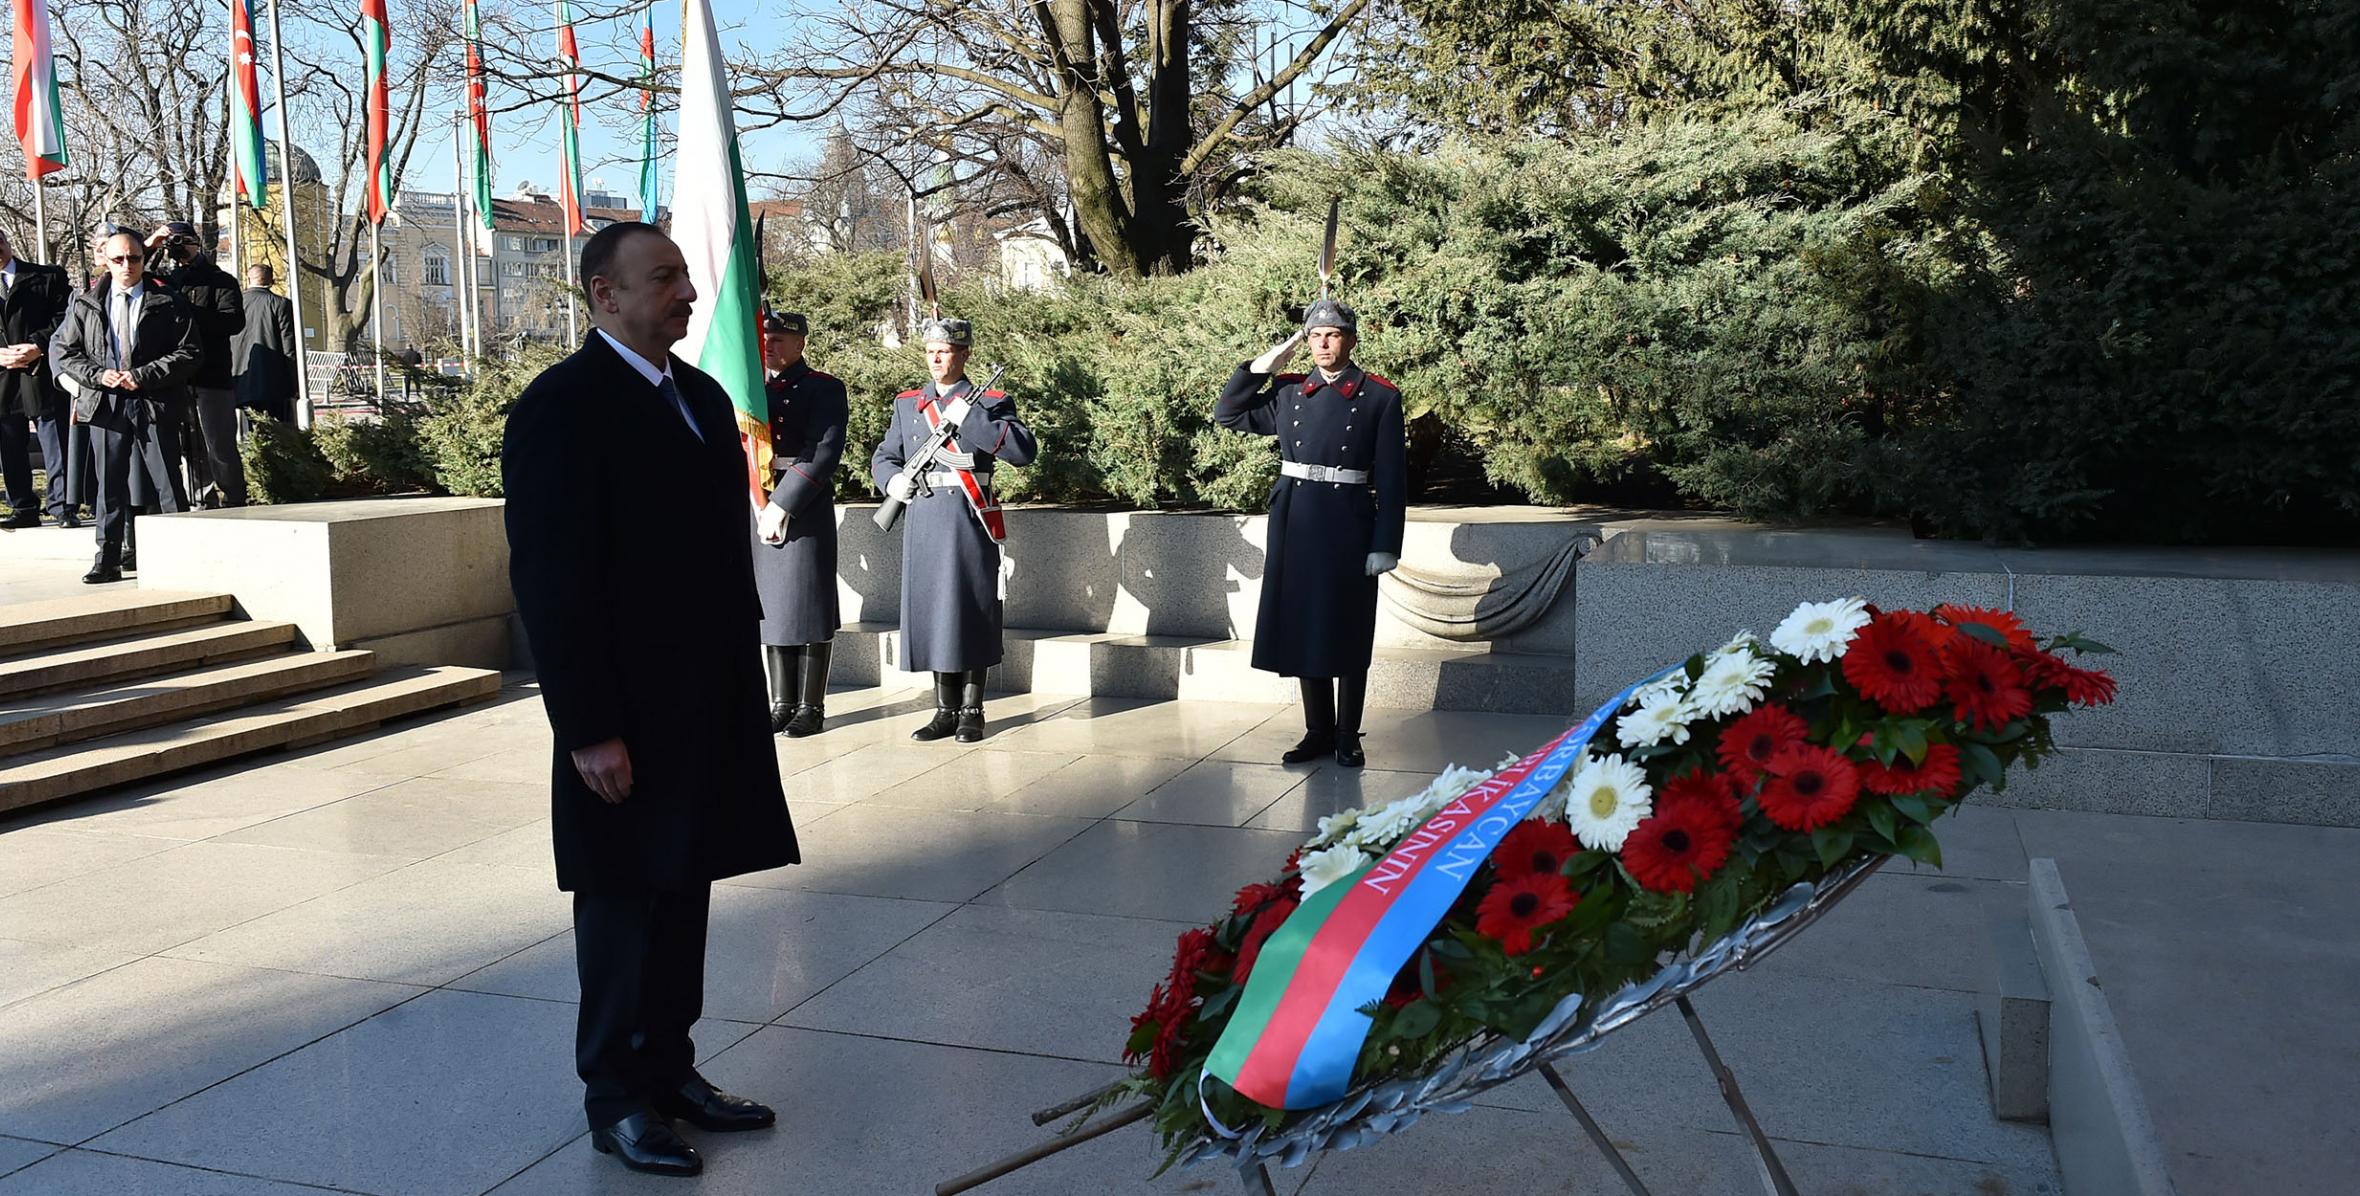 Ilham Aliyev visited the tomb of the Unknown Soldier in Sofia